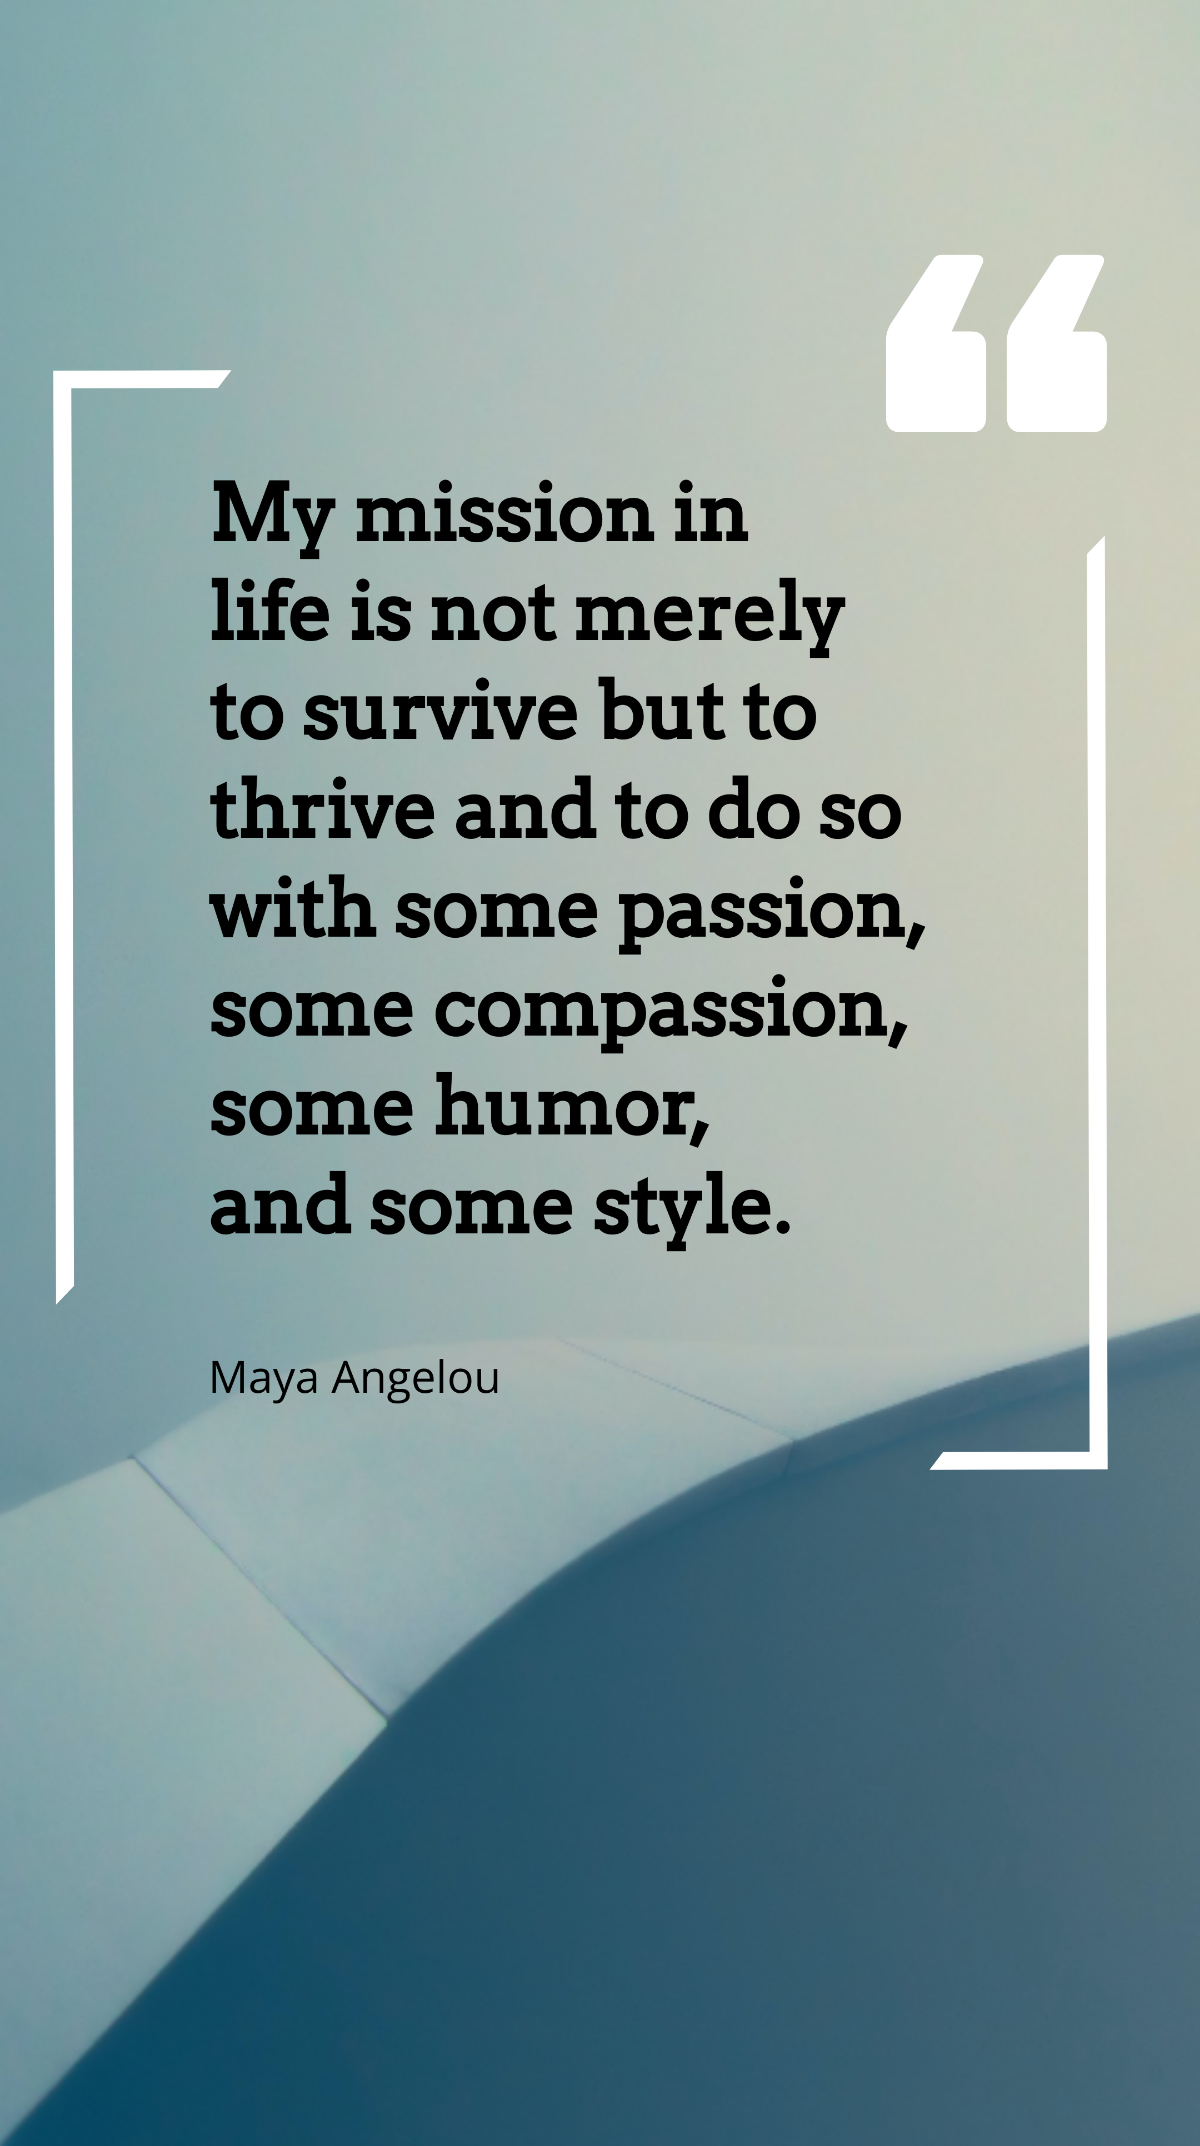 Maya Angelou - My mission in life is not merely to survive but to thrive and to do so with some passion, some compassion, some humor, and some style. Template